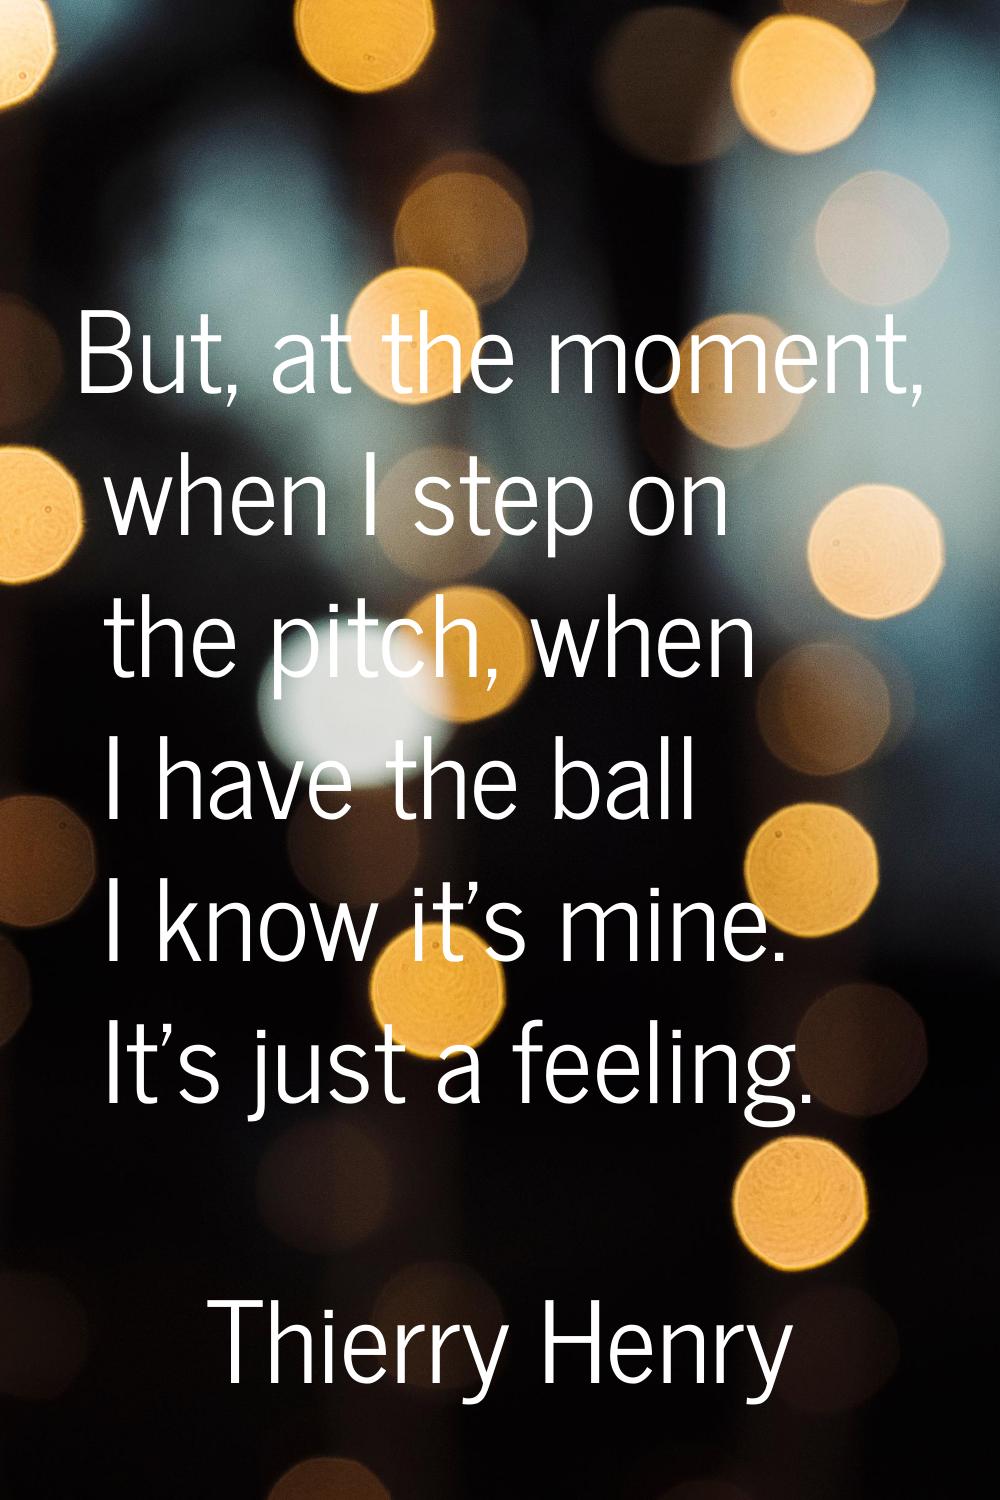 But, at the moment, when I step on the pitch, when I have the ball I know it's mine. It's just a fe